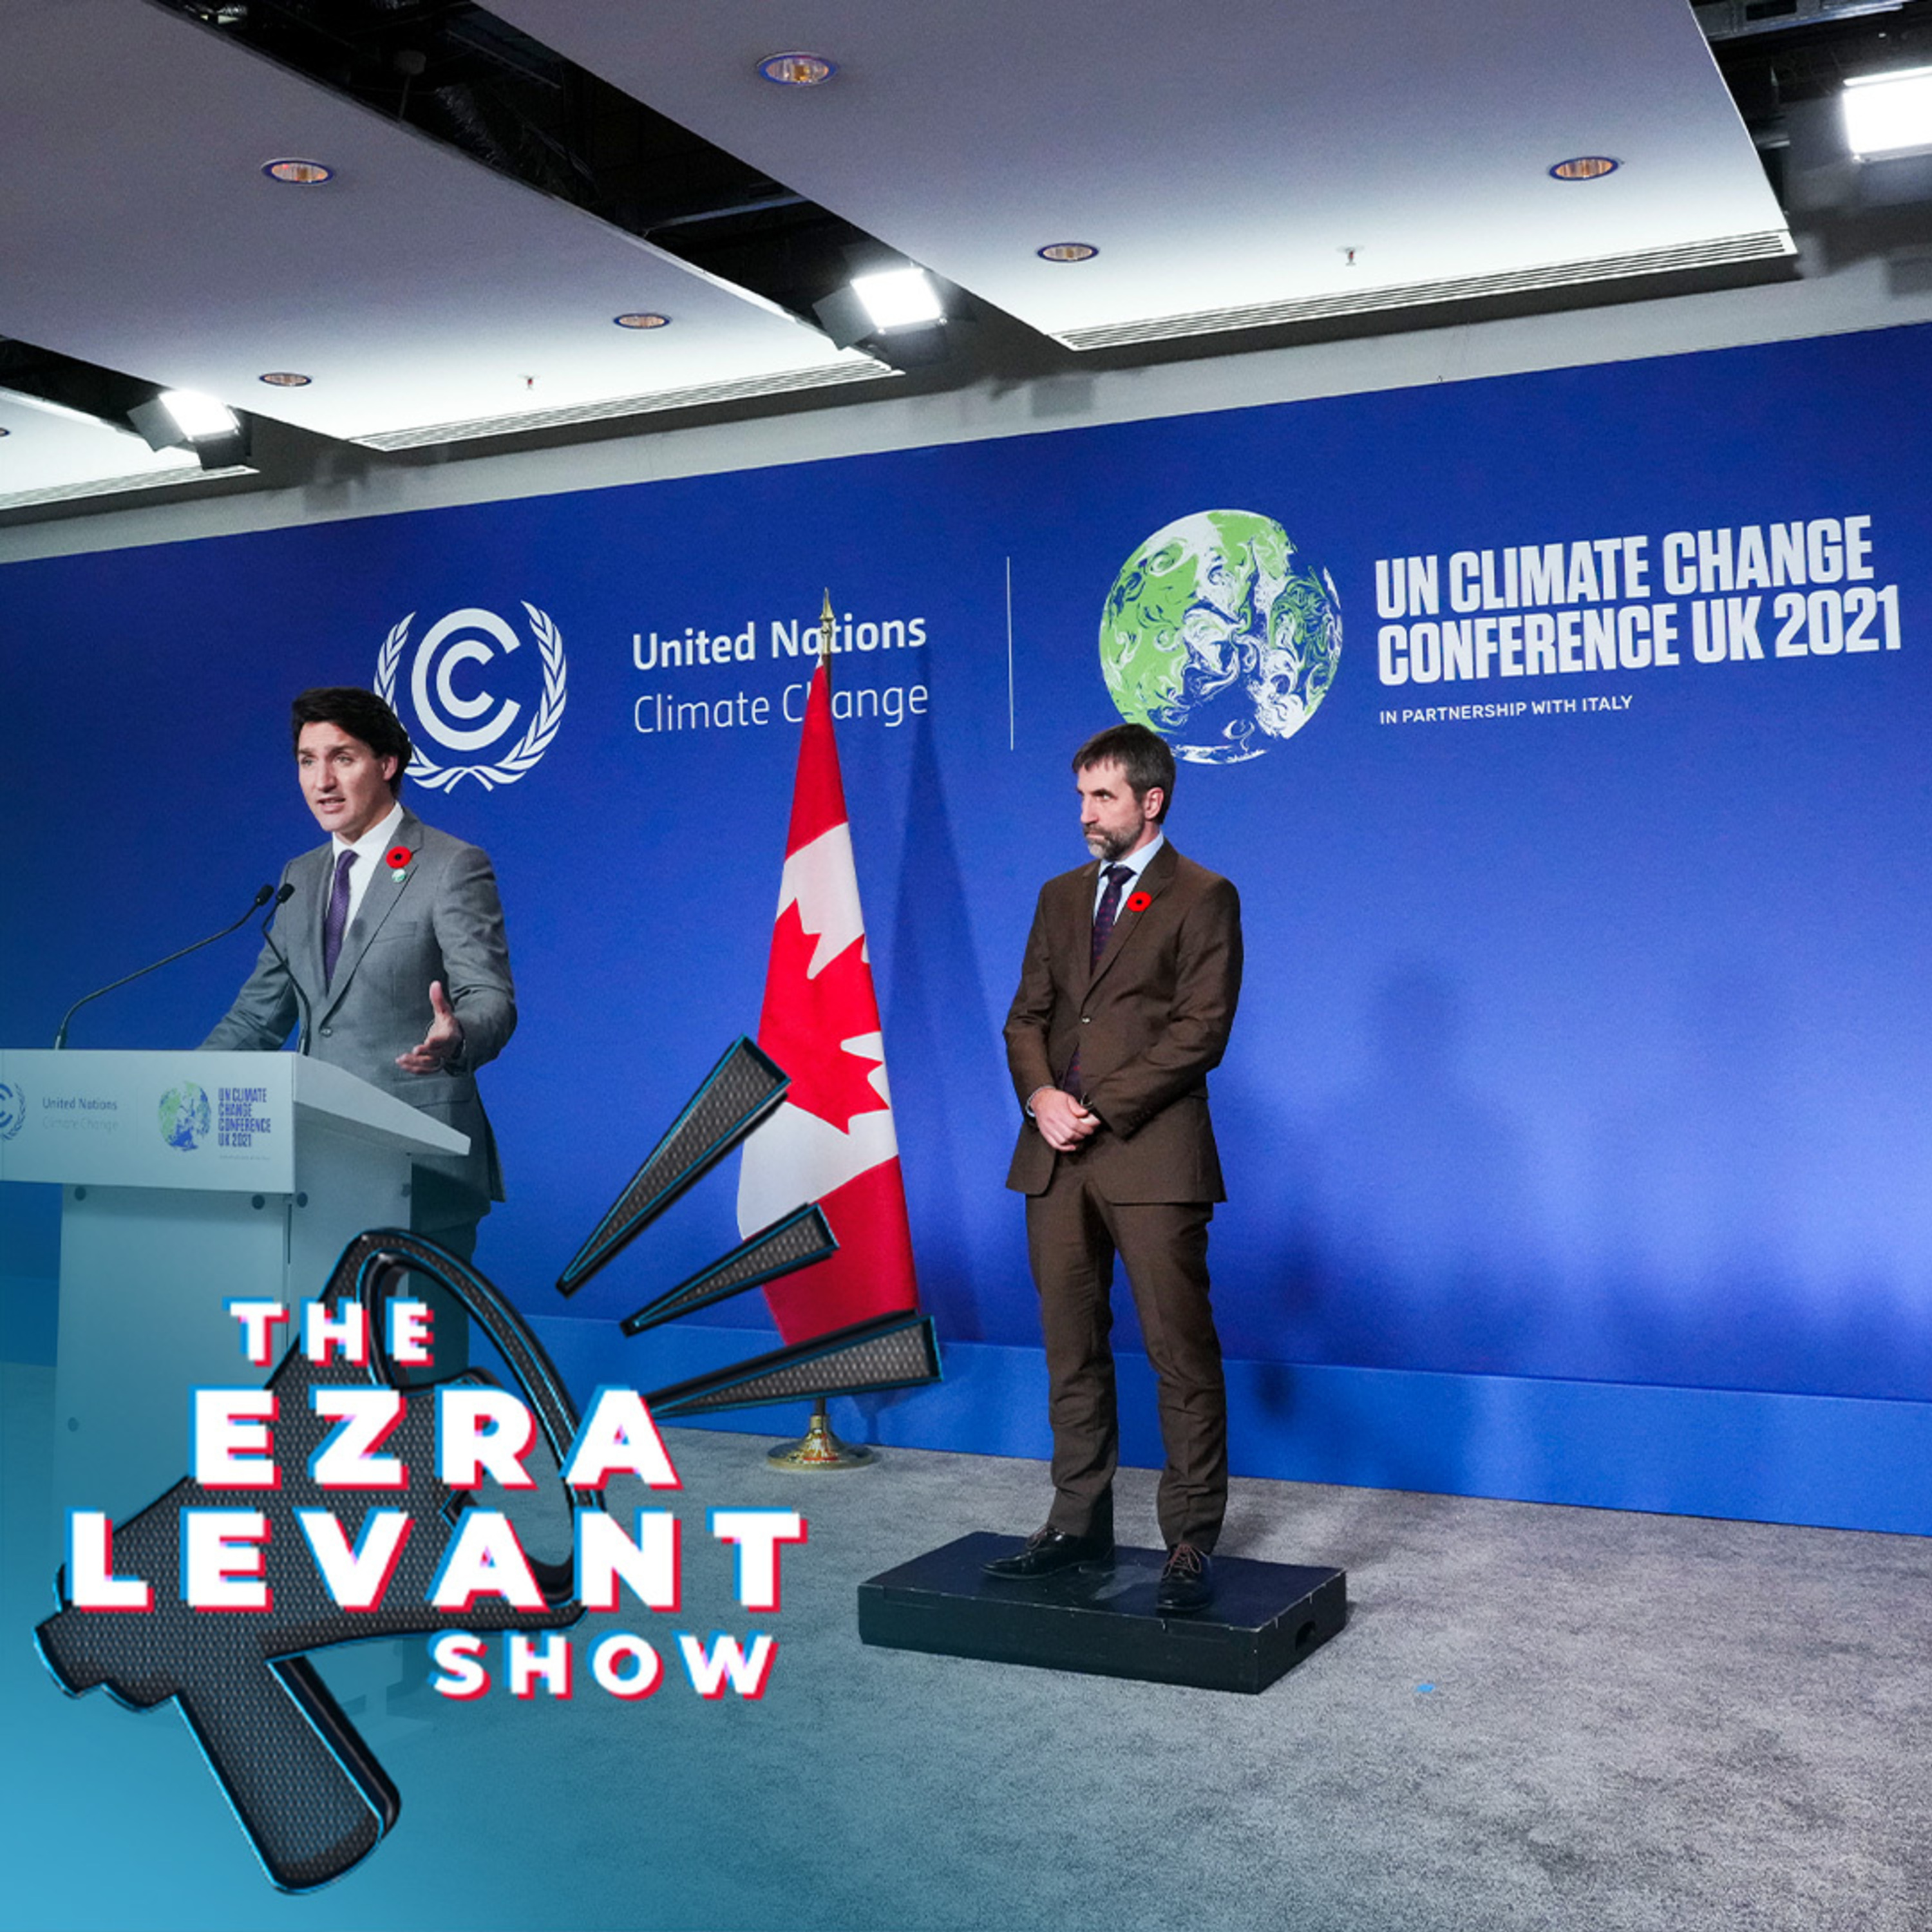 EZRA LEVANT | Trudeau's climate czar proclaims his new government mantra: Environmental Equity